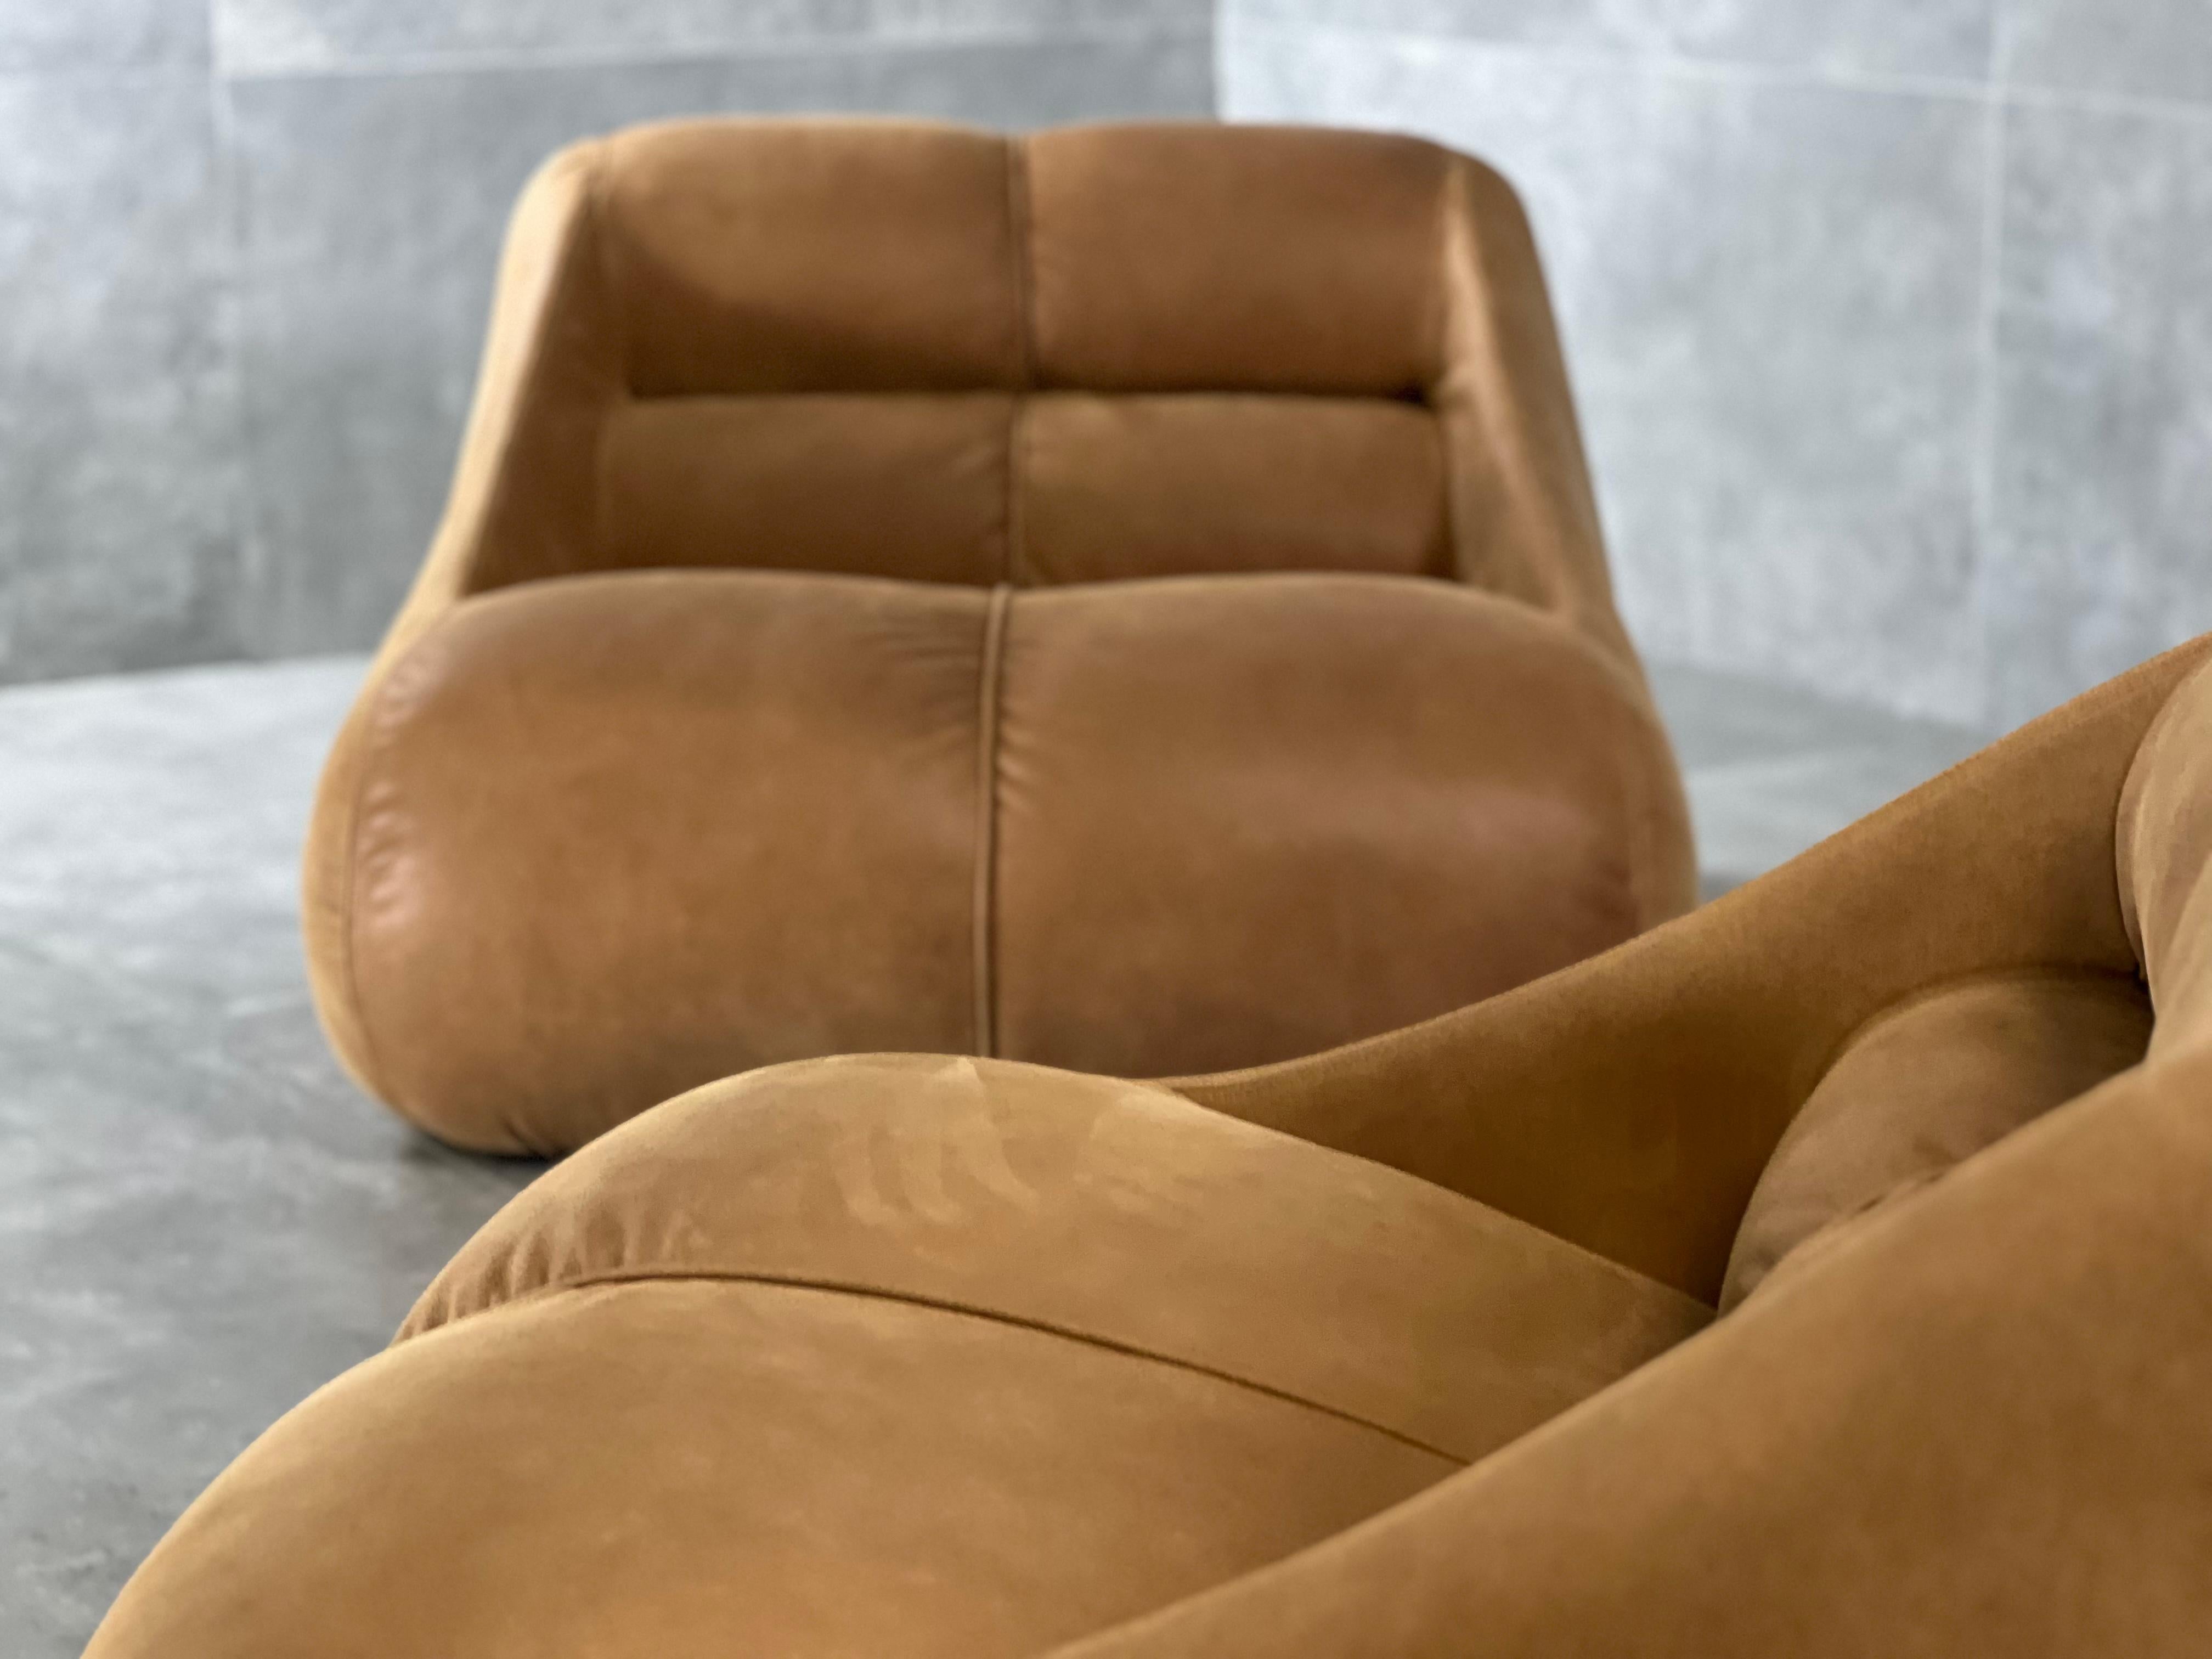 Super puffy shaped and highly comfortable so called Ciuingam lounge chairs designed by Jonathan DePas, Donato D’Urbino & Paolo Lomazzi and manufactured by BBB Bonacina, Italy 1967. This super puffy set of chairs is fully foam filled and has a